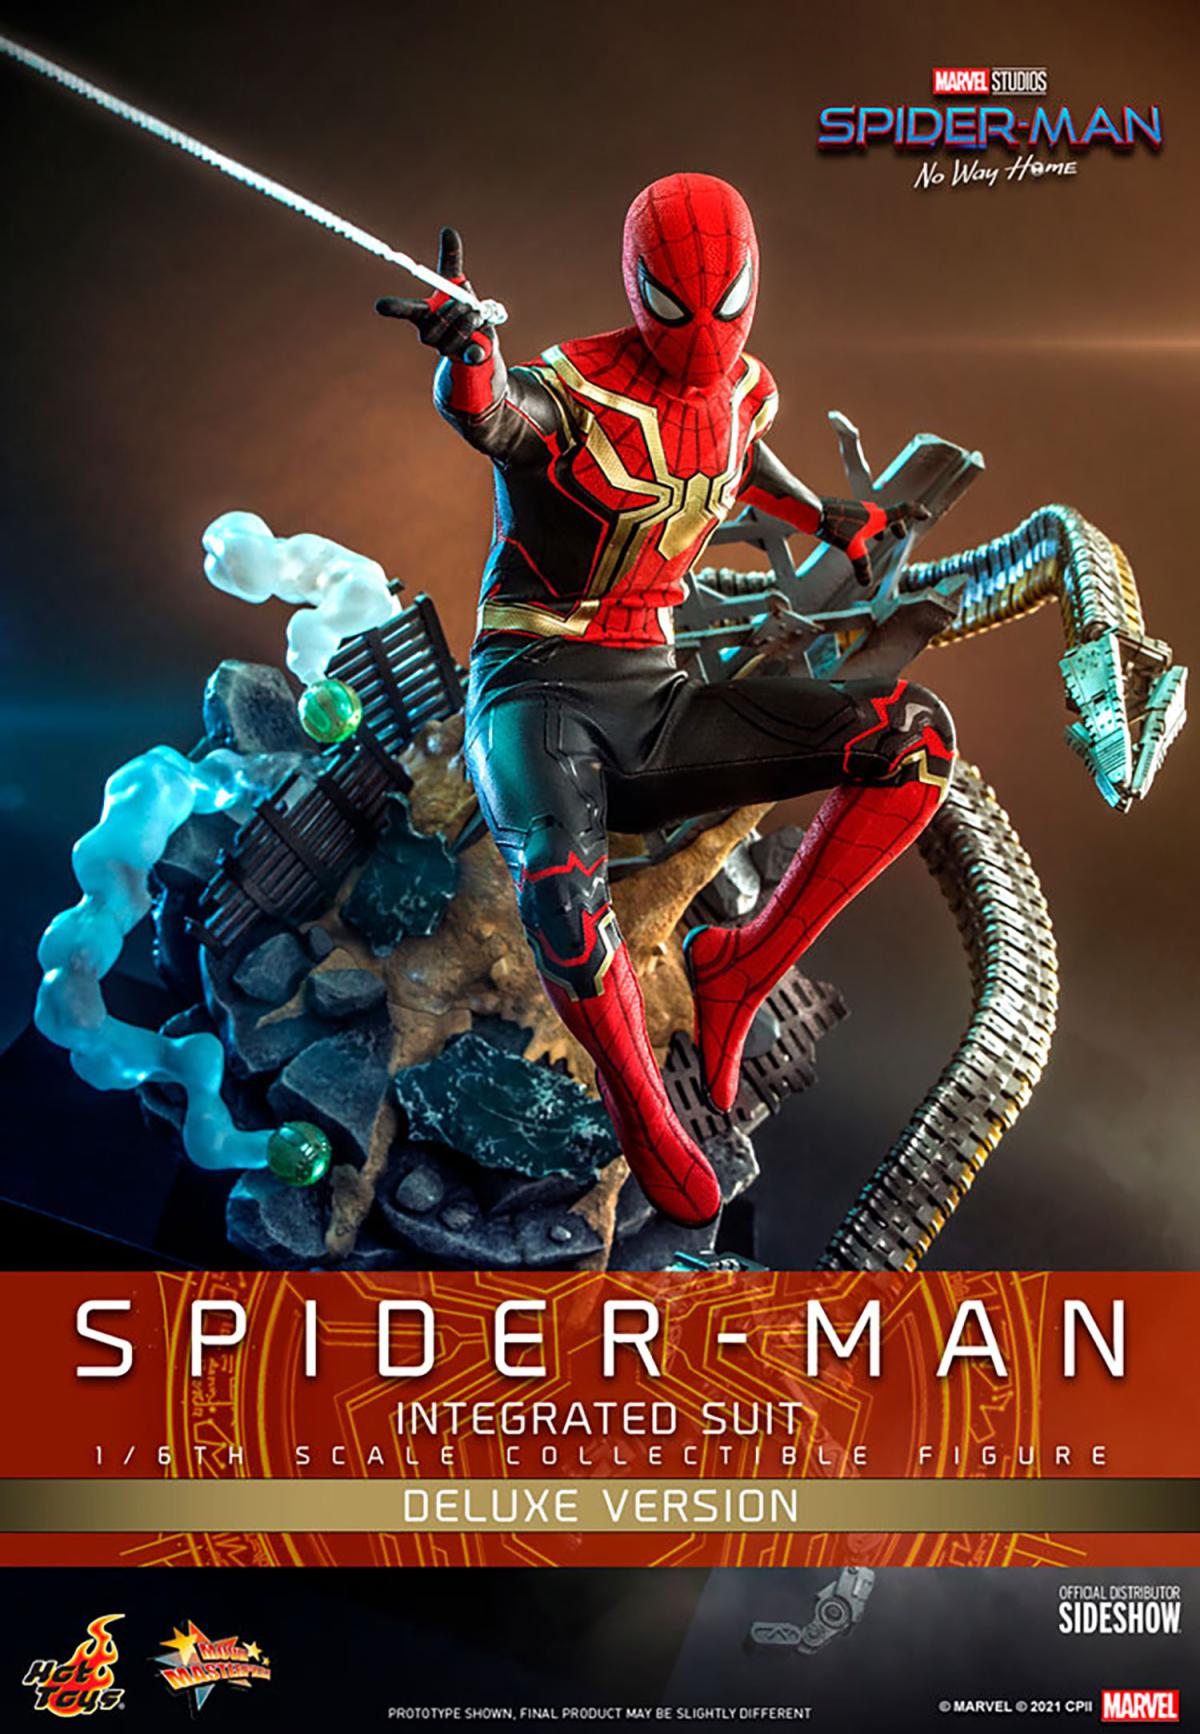 Spider-Man (Integrated Suit) Deluxe Version Sixth Scale Figure